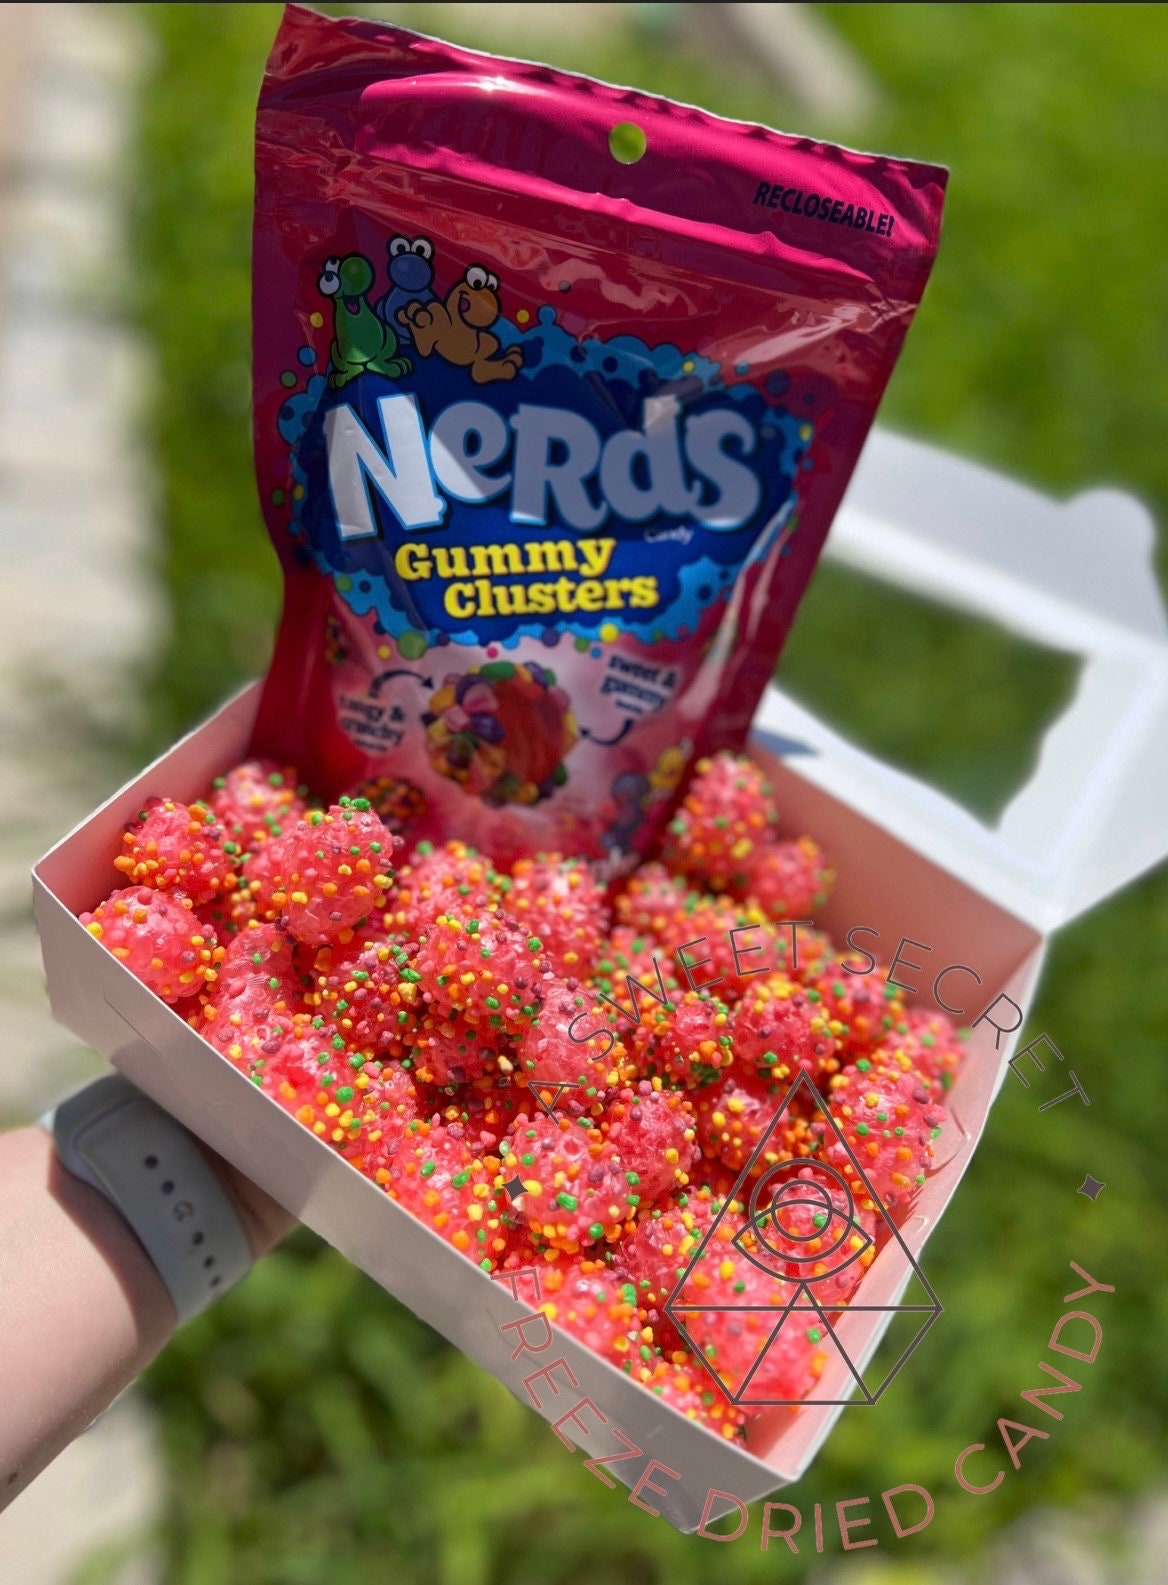 Nerds Gummy Clusters Variety Pack | Rainbow Gummy Clusters, Very Berry Gummy Clusters, Big Chewy Nerds | Individually Wrapped, Reclosable Bags of